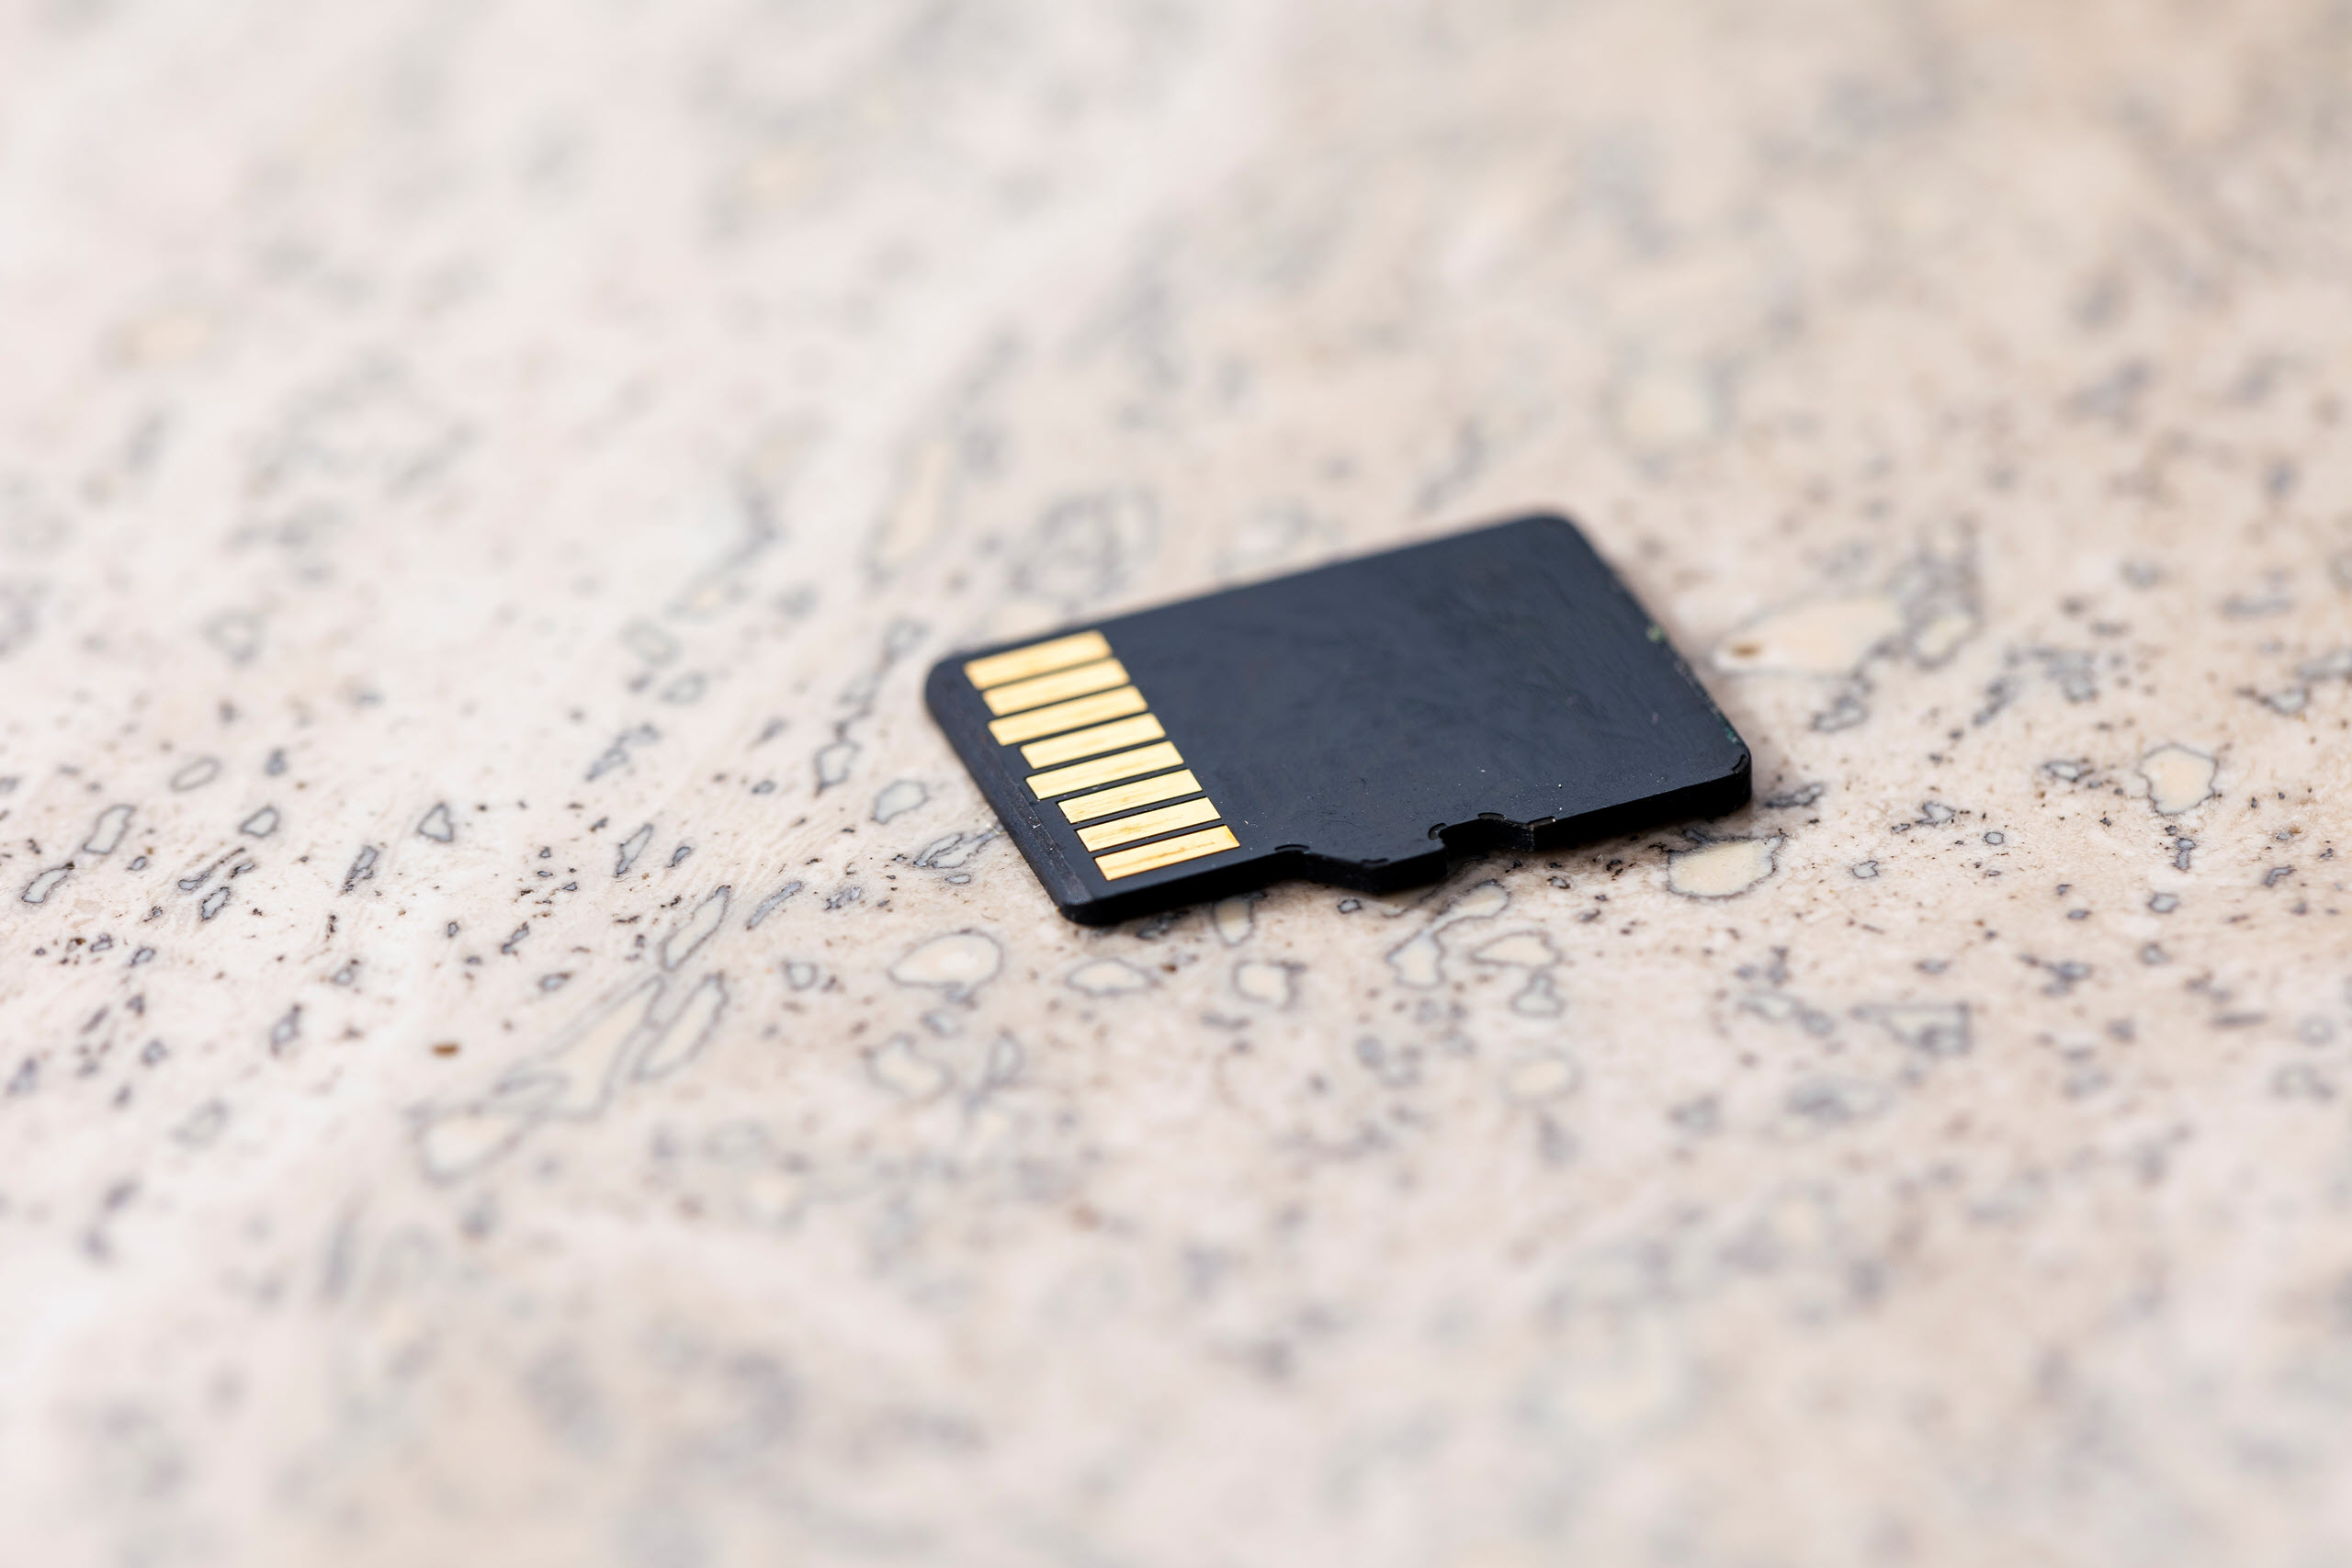 A black microSD card on a light brown textured back ground